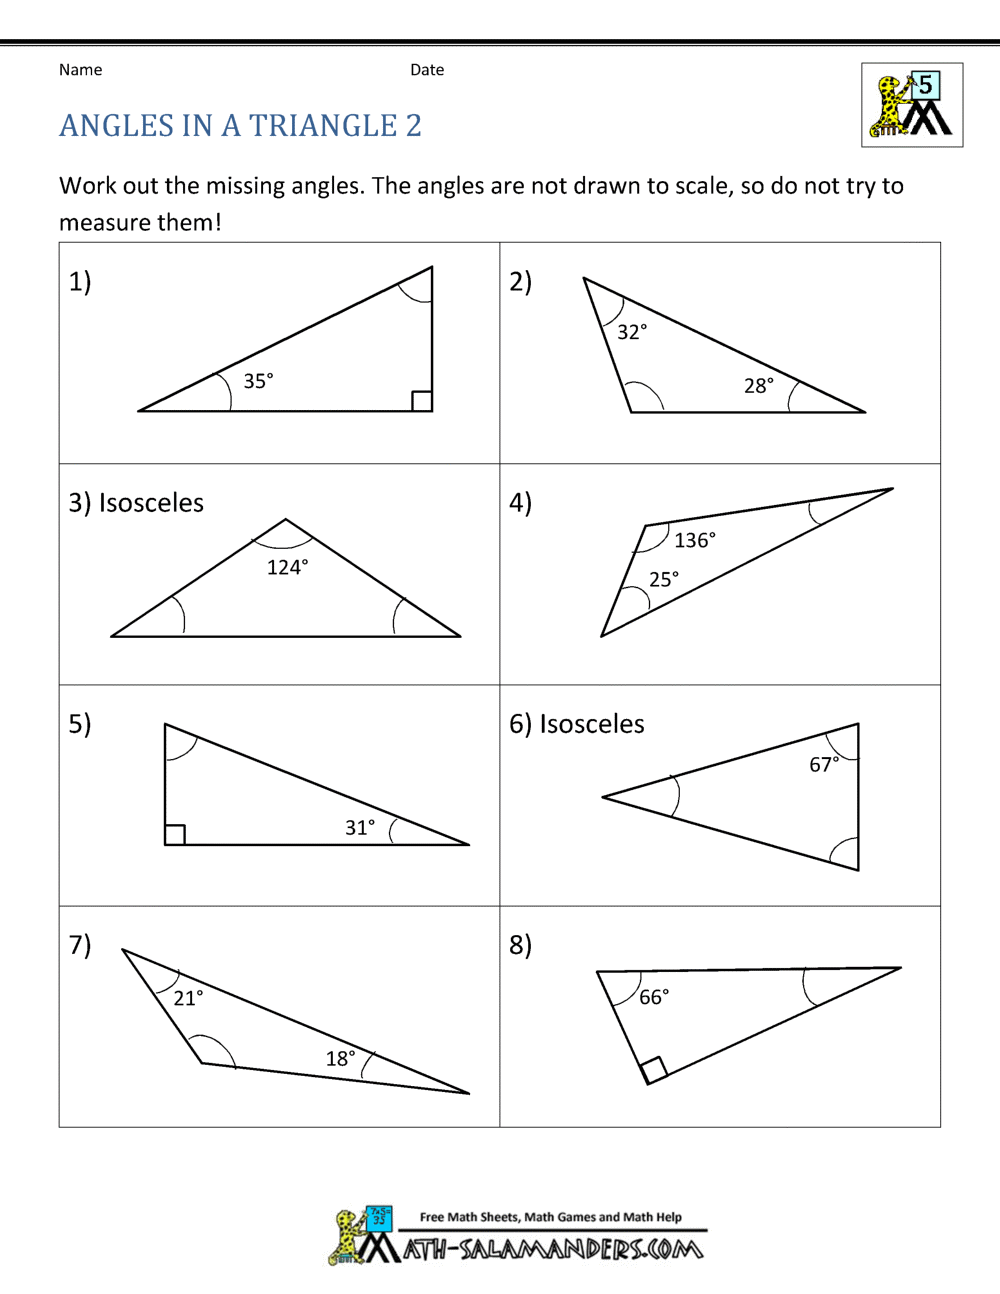 11th Grade Geometry With Regard To Triangle Angle Sum Worksheet